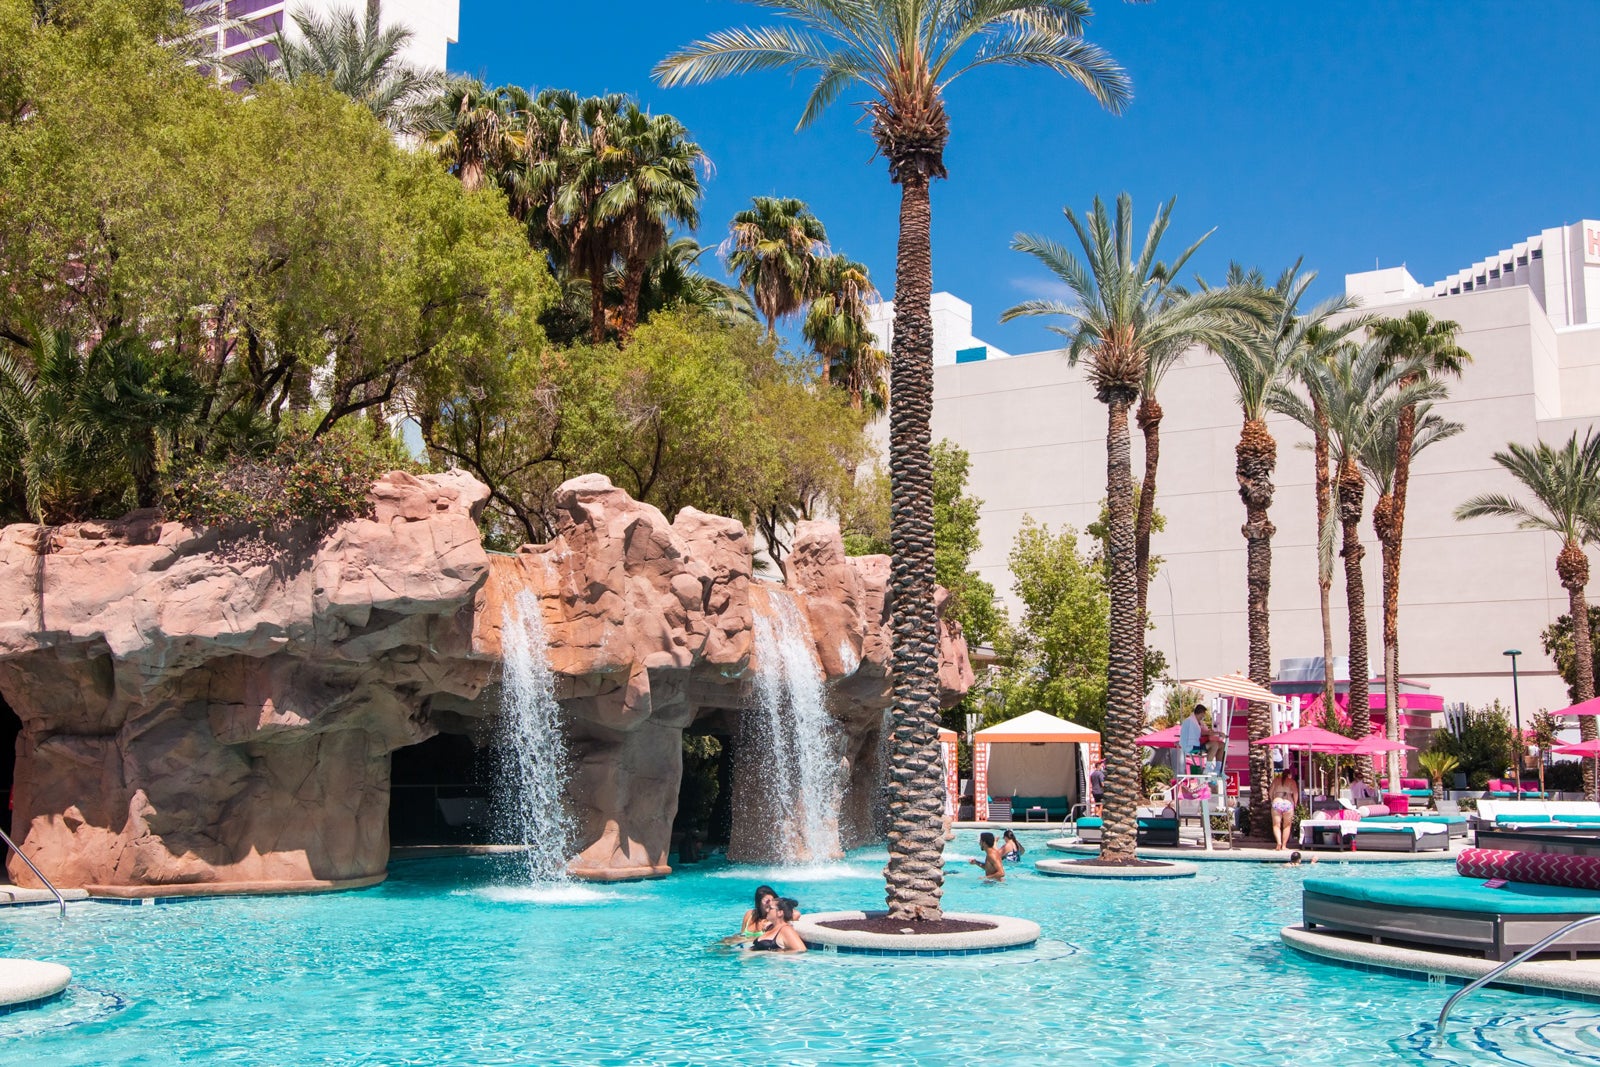 The 17 best hotel pools in Las Vegas, from adults-only to family